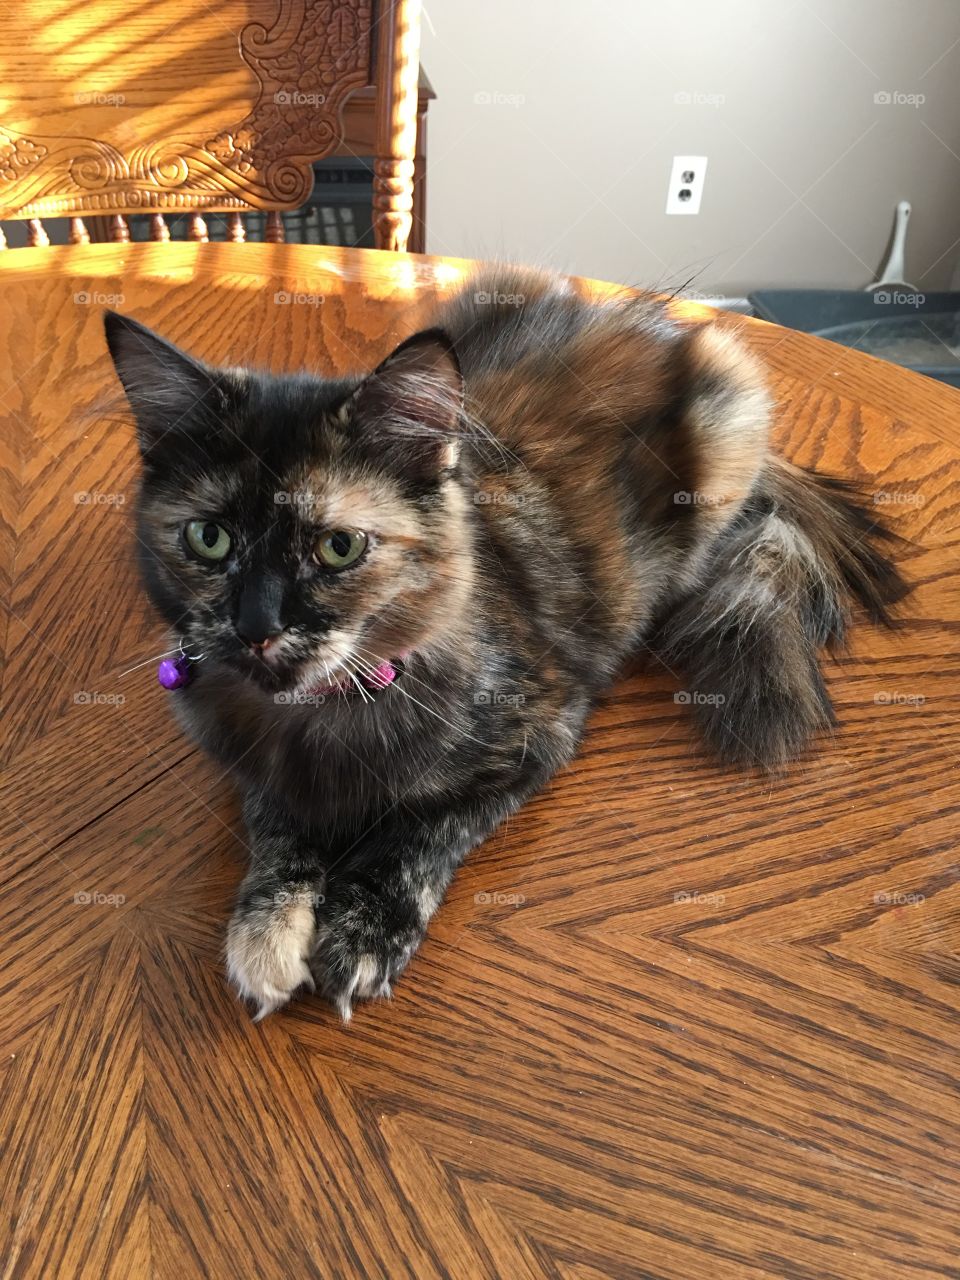 My kitty Indy. She’s a tortoiseshell she-cat, about eight months old. I caught her on the table one day and decided the lighting was too good to pass up. 